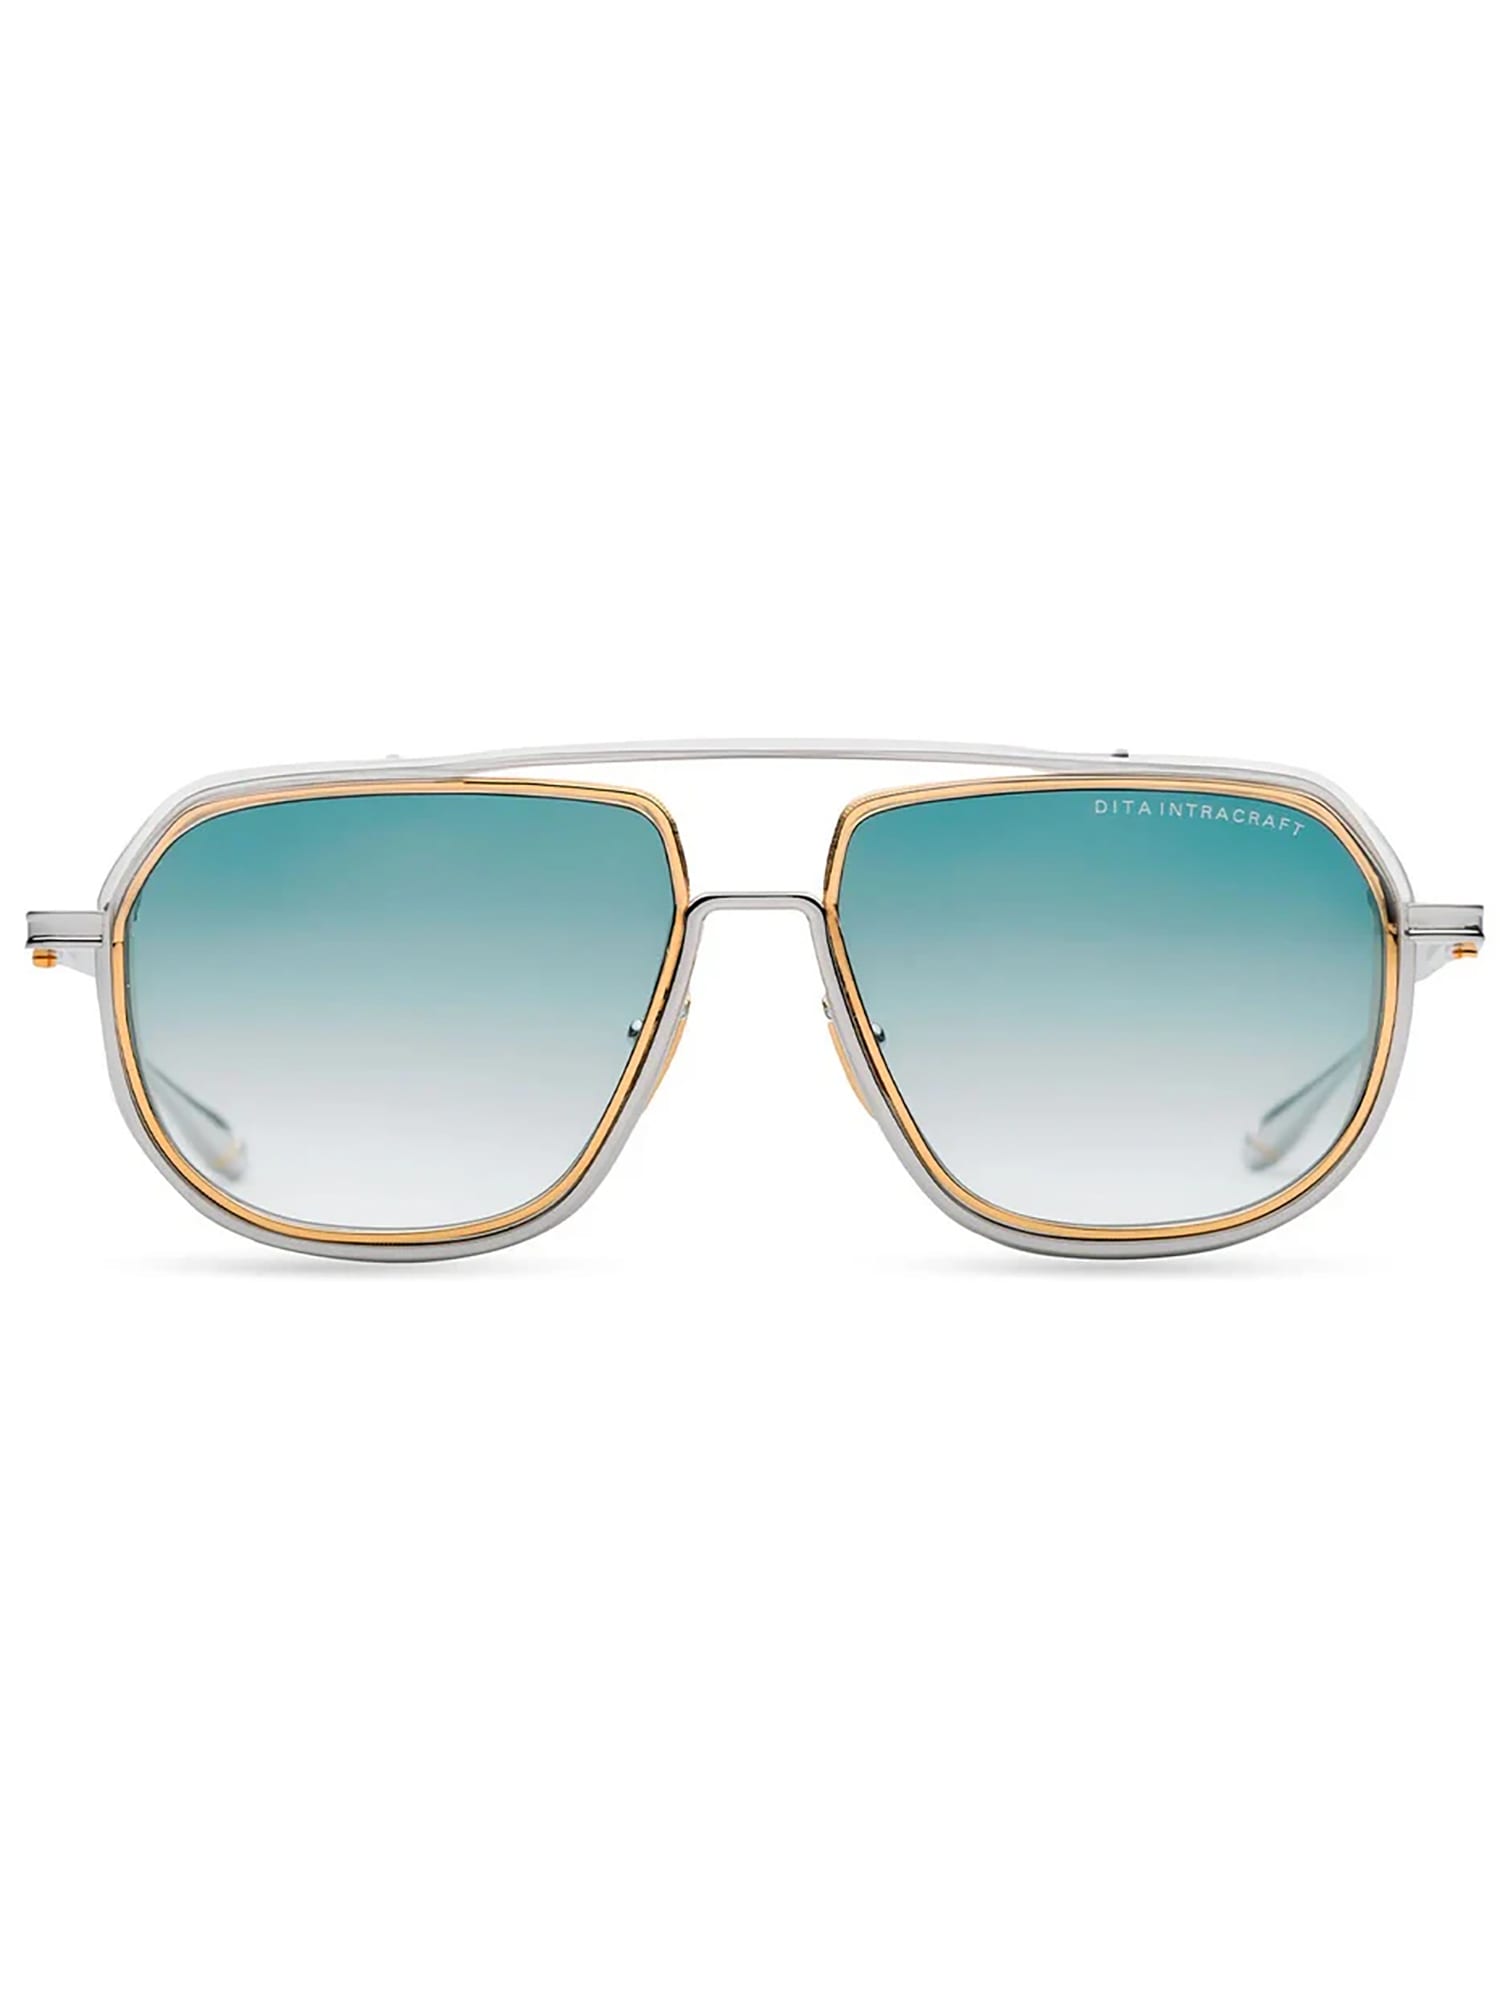 Dita Dts165/a/03 Intracraft Sunglasses In Silver_yellow Gold